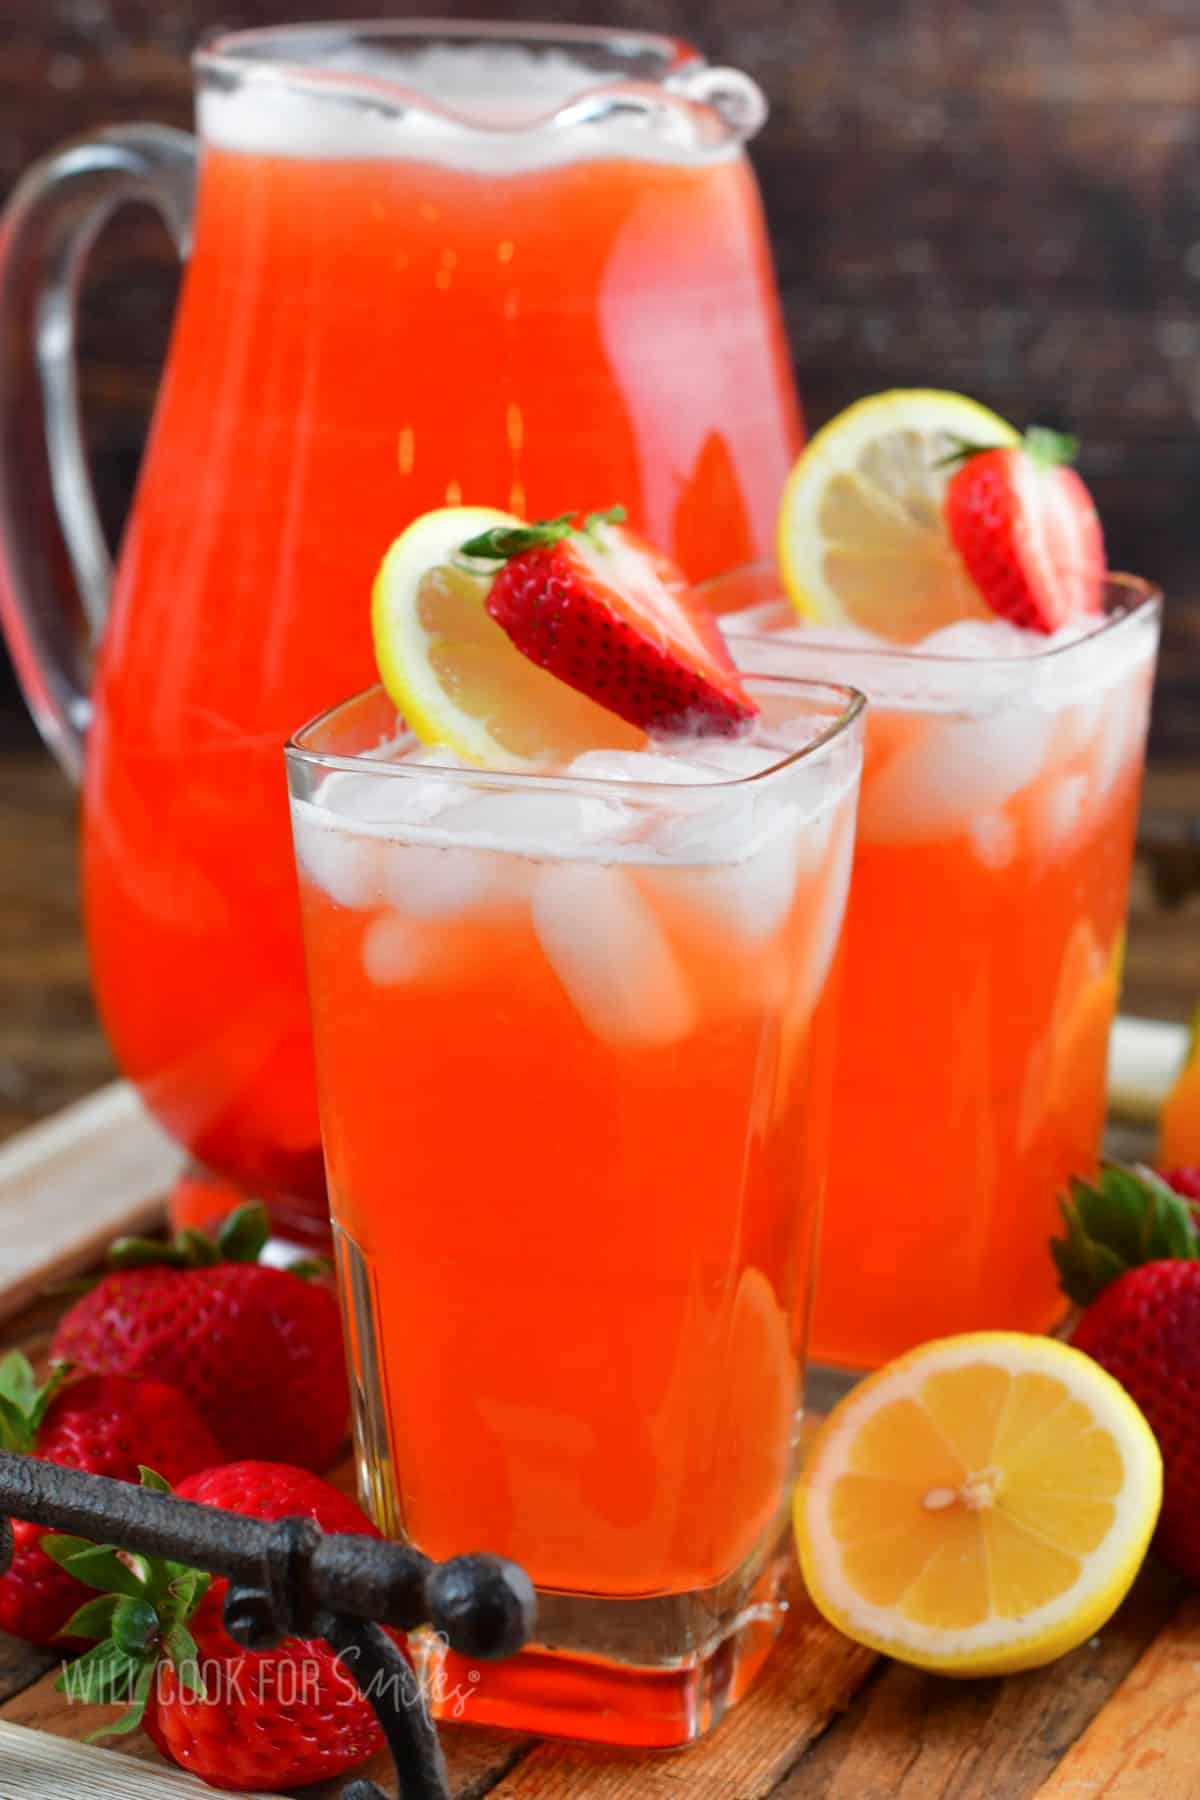 two glasses filled with strawberry lemonade next to a pitcher filled as well.